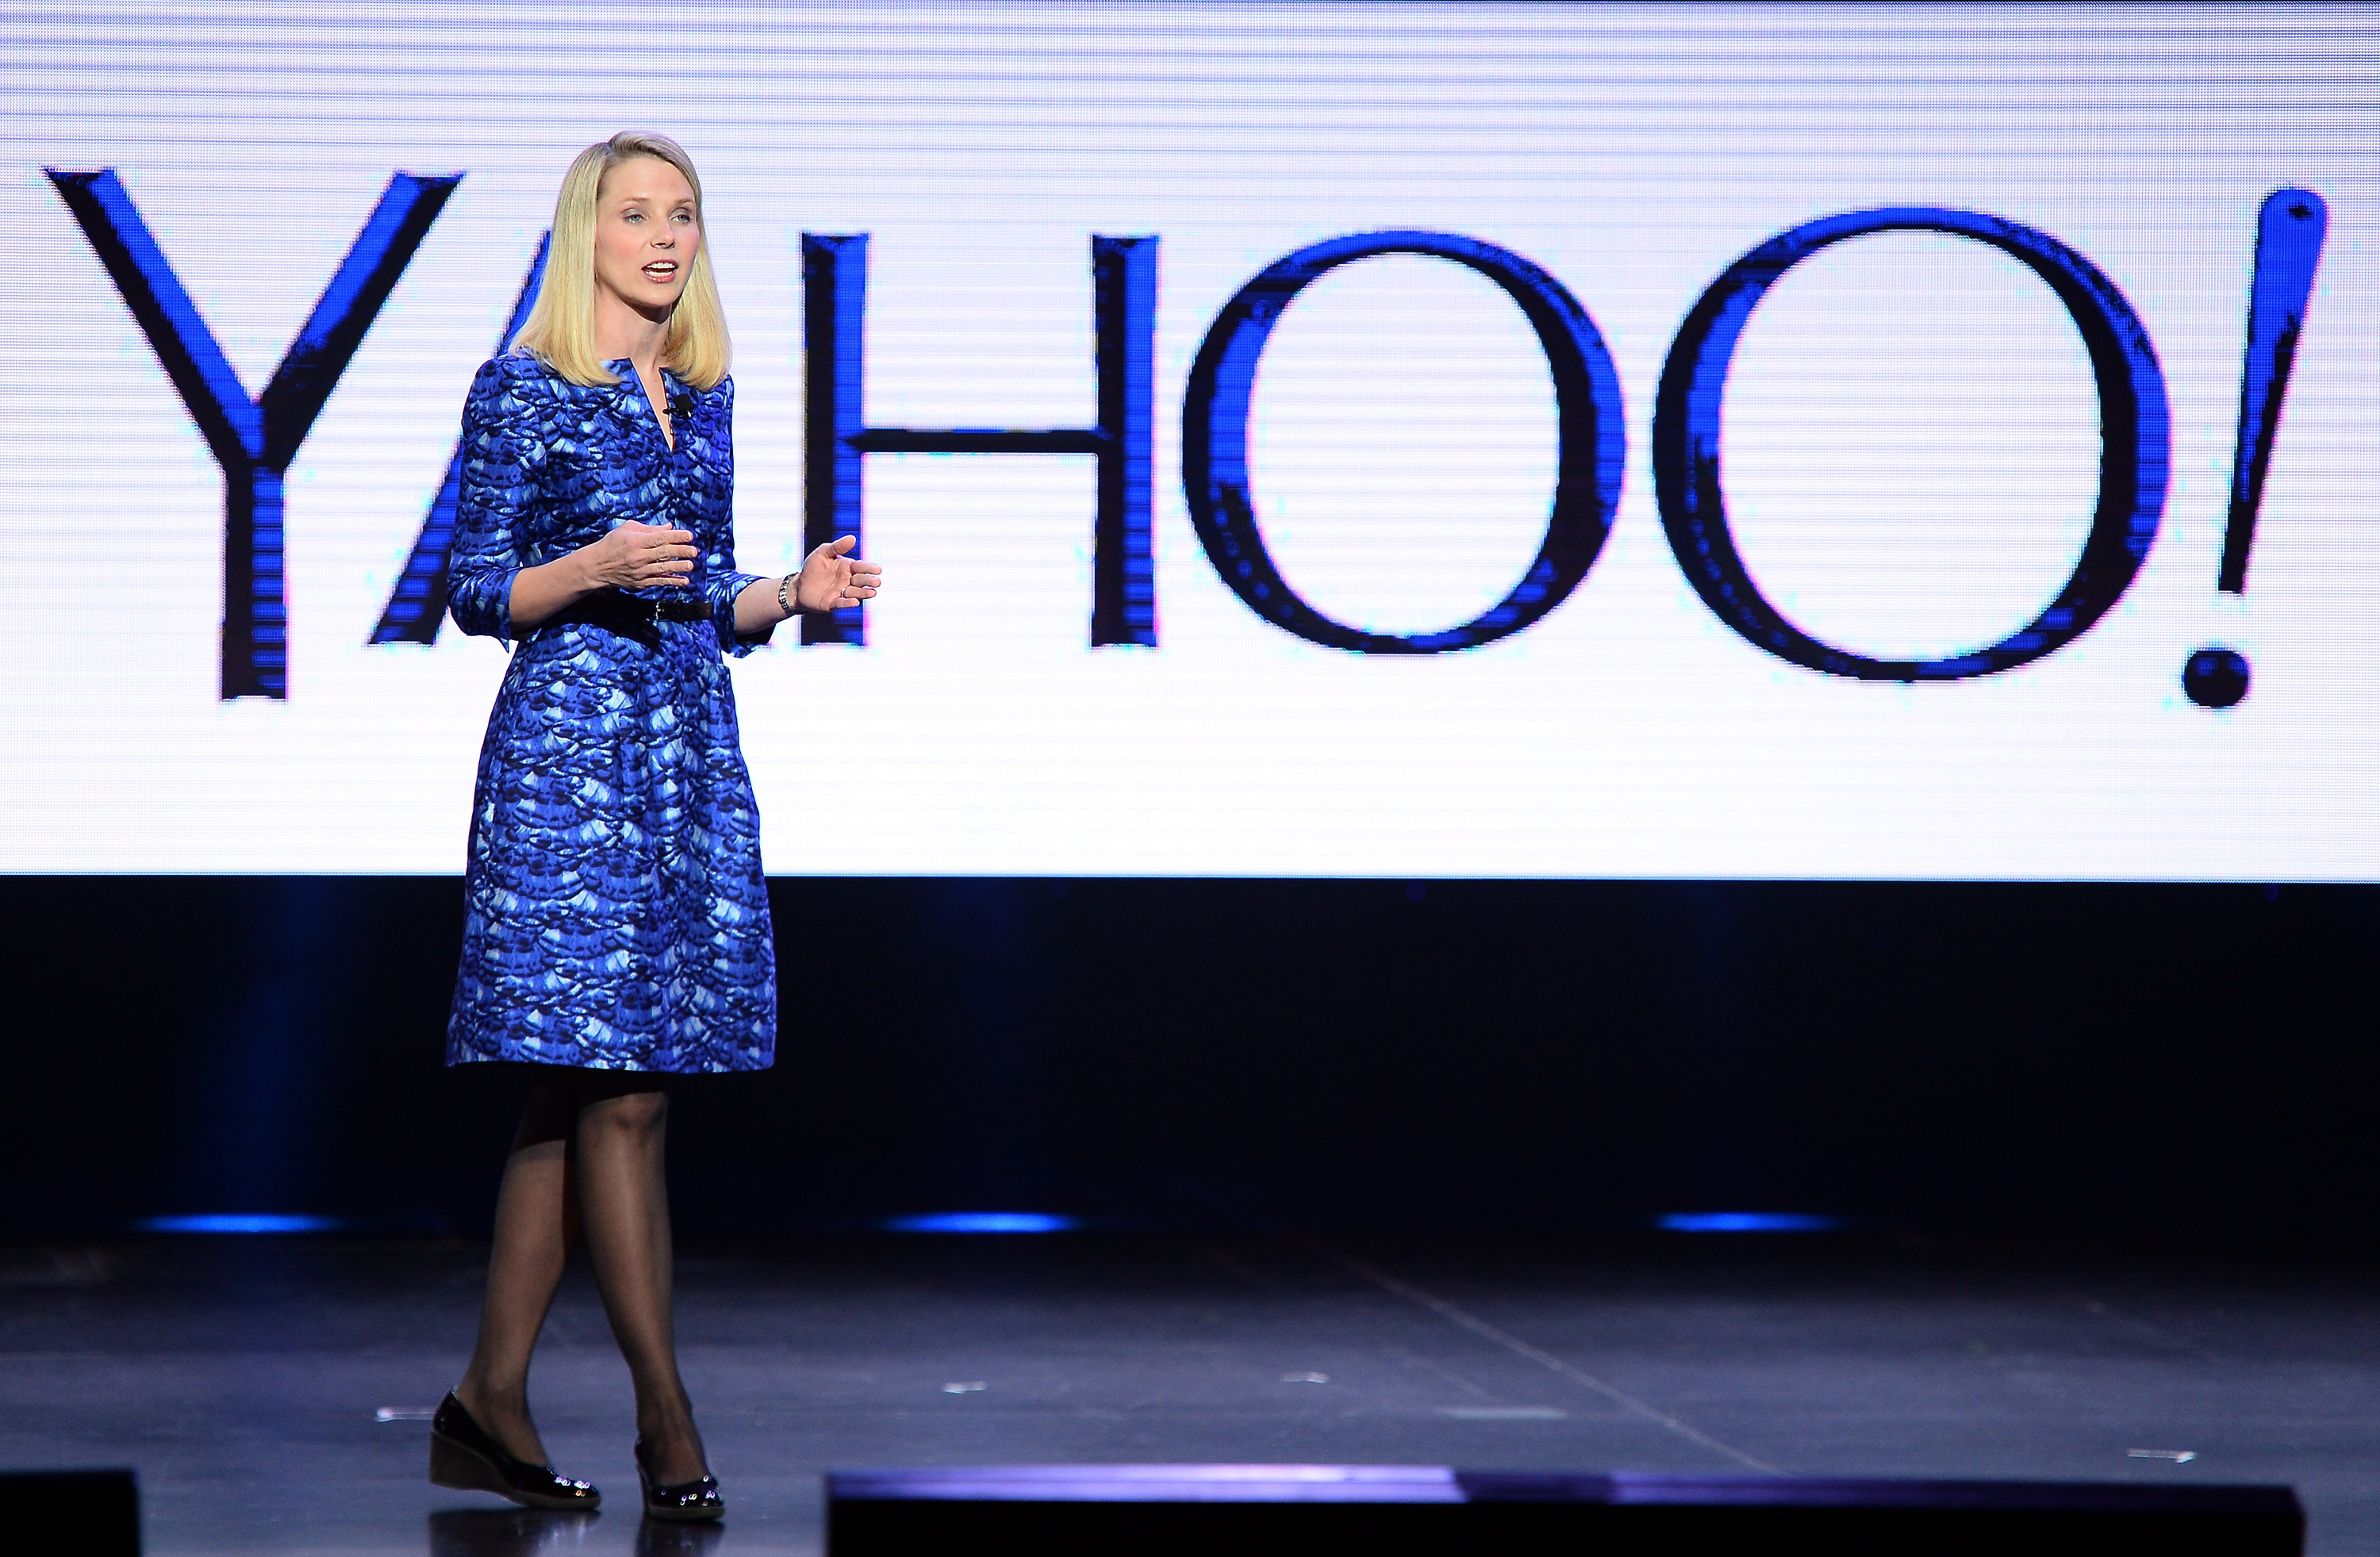 Yahoo! President and CEO Marissa Mayer delivers a keynote address at the 2014 International CES at The Las Vegas Hotel &amp; Casino on January 7, 2014 in Las Vegas, Nevada. (Ethan Miller&mdash;Getty Images)